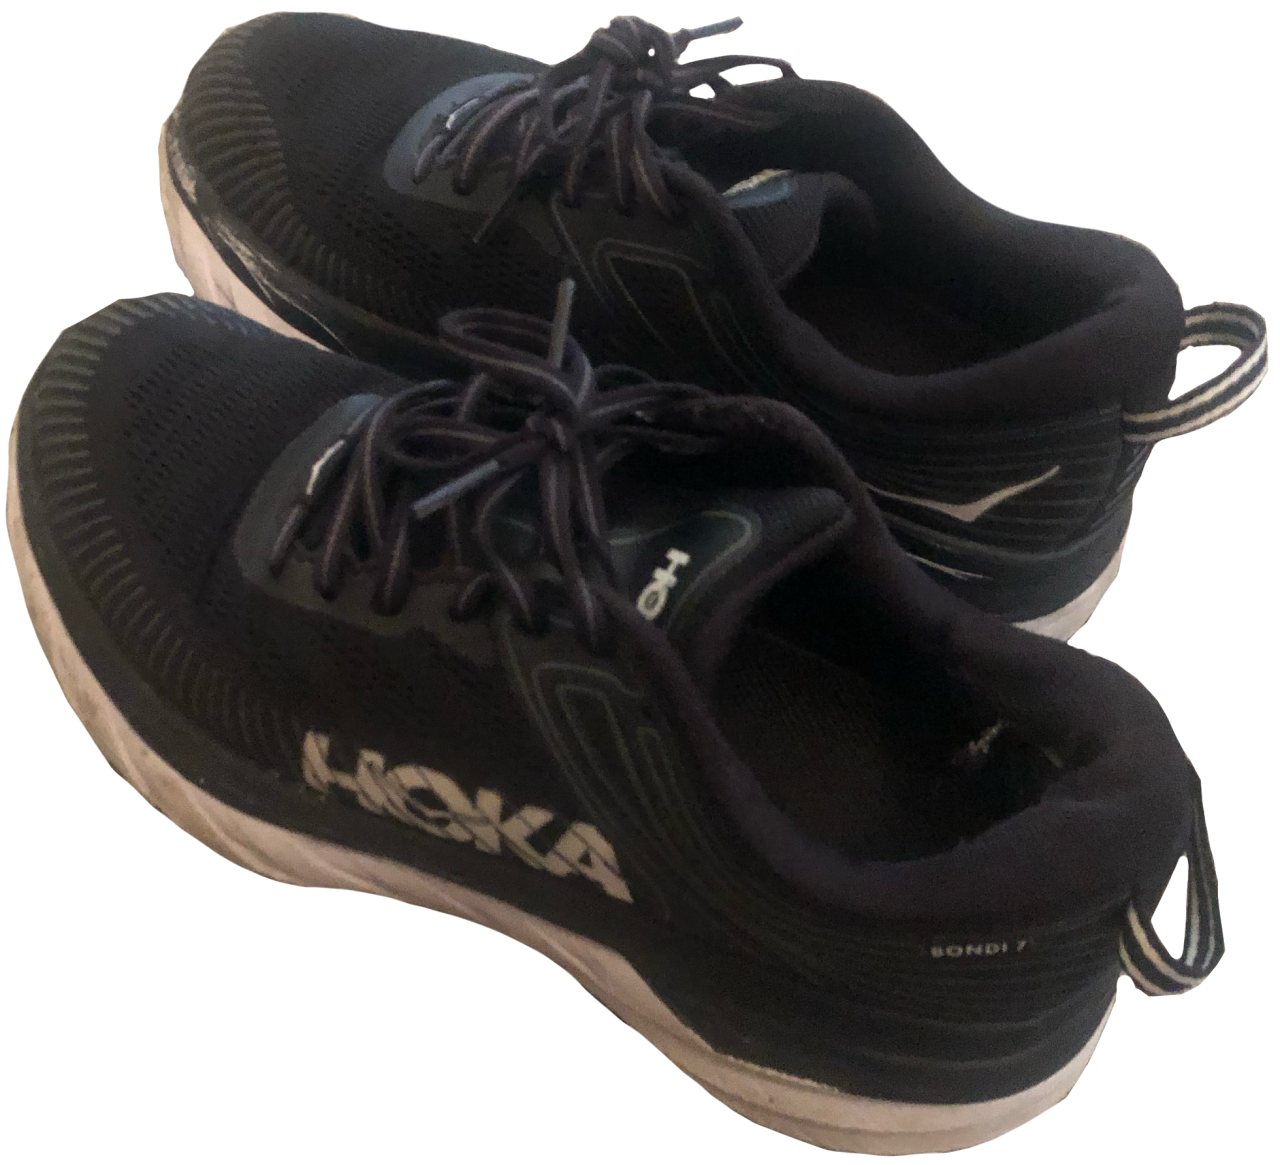 A pair of black and white shoes from Hoka